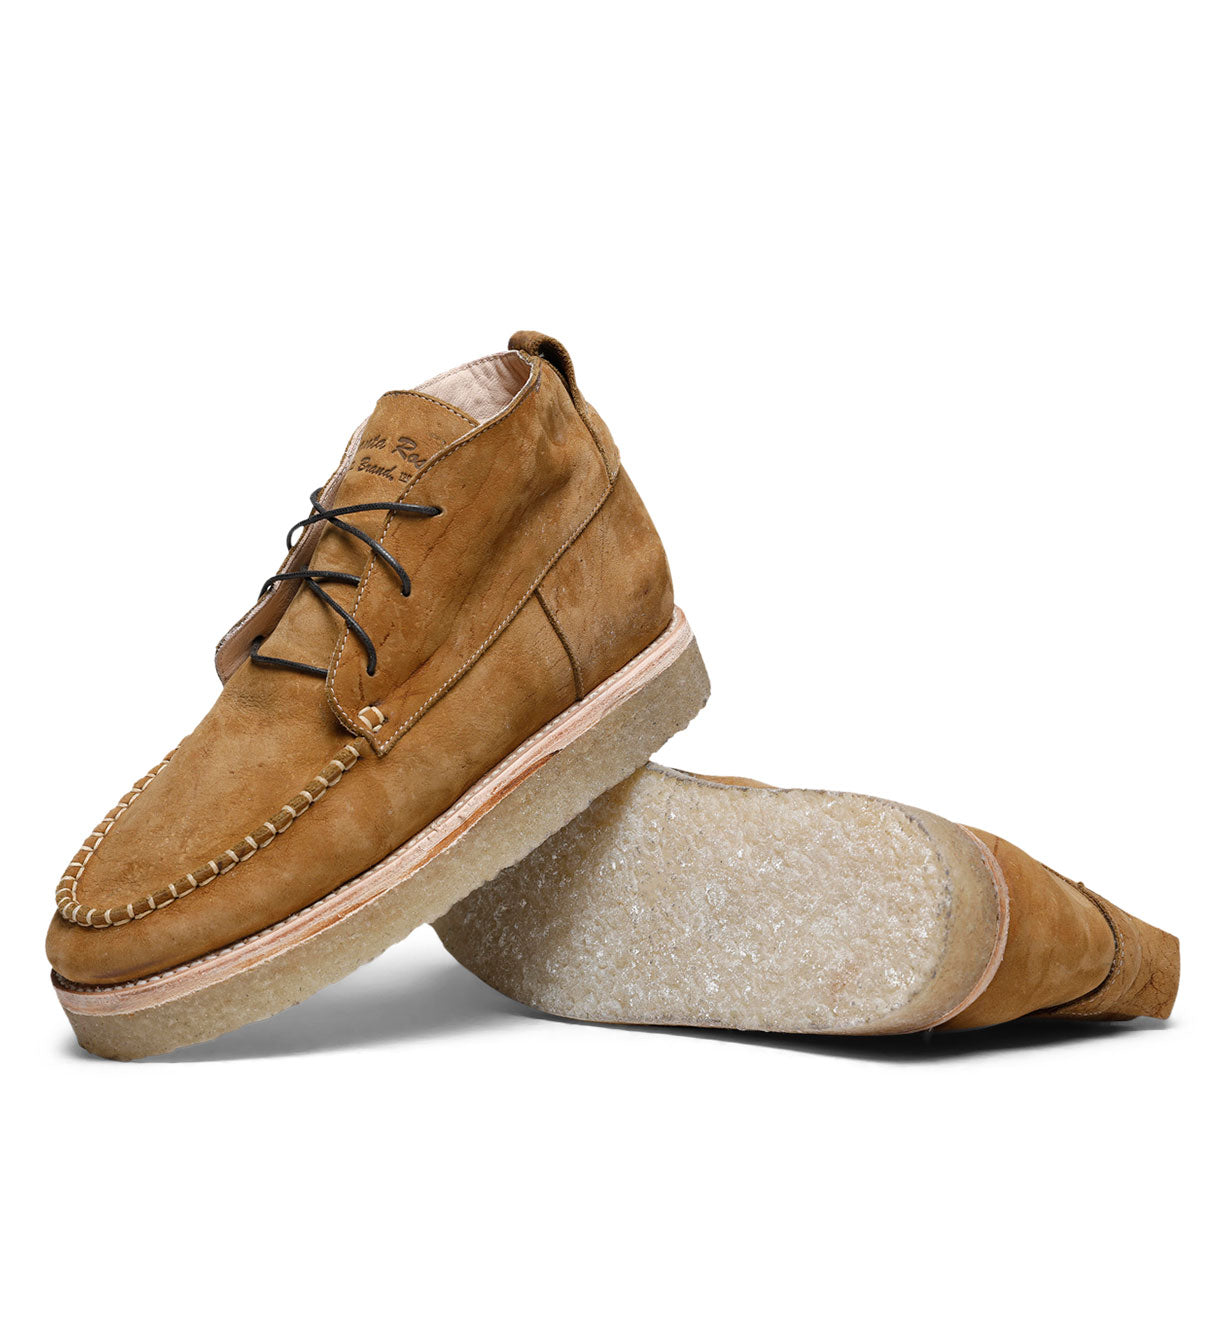 A pair of Santa Rosa Brand Tahoma Moccasin boots made of peanut kudu leather isolated on a white background.